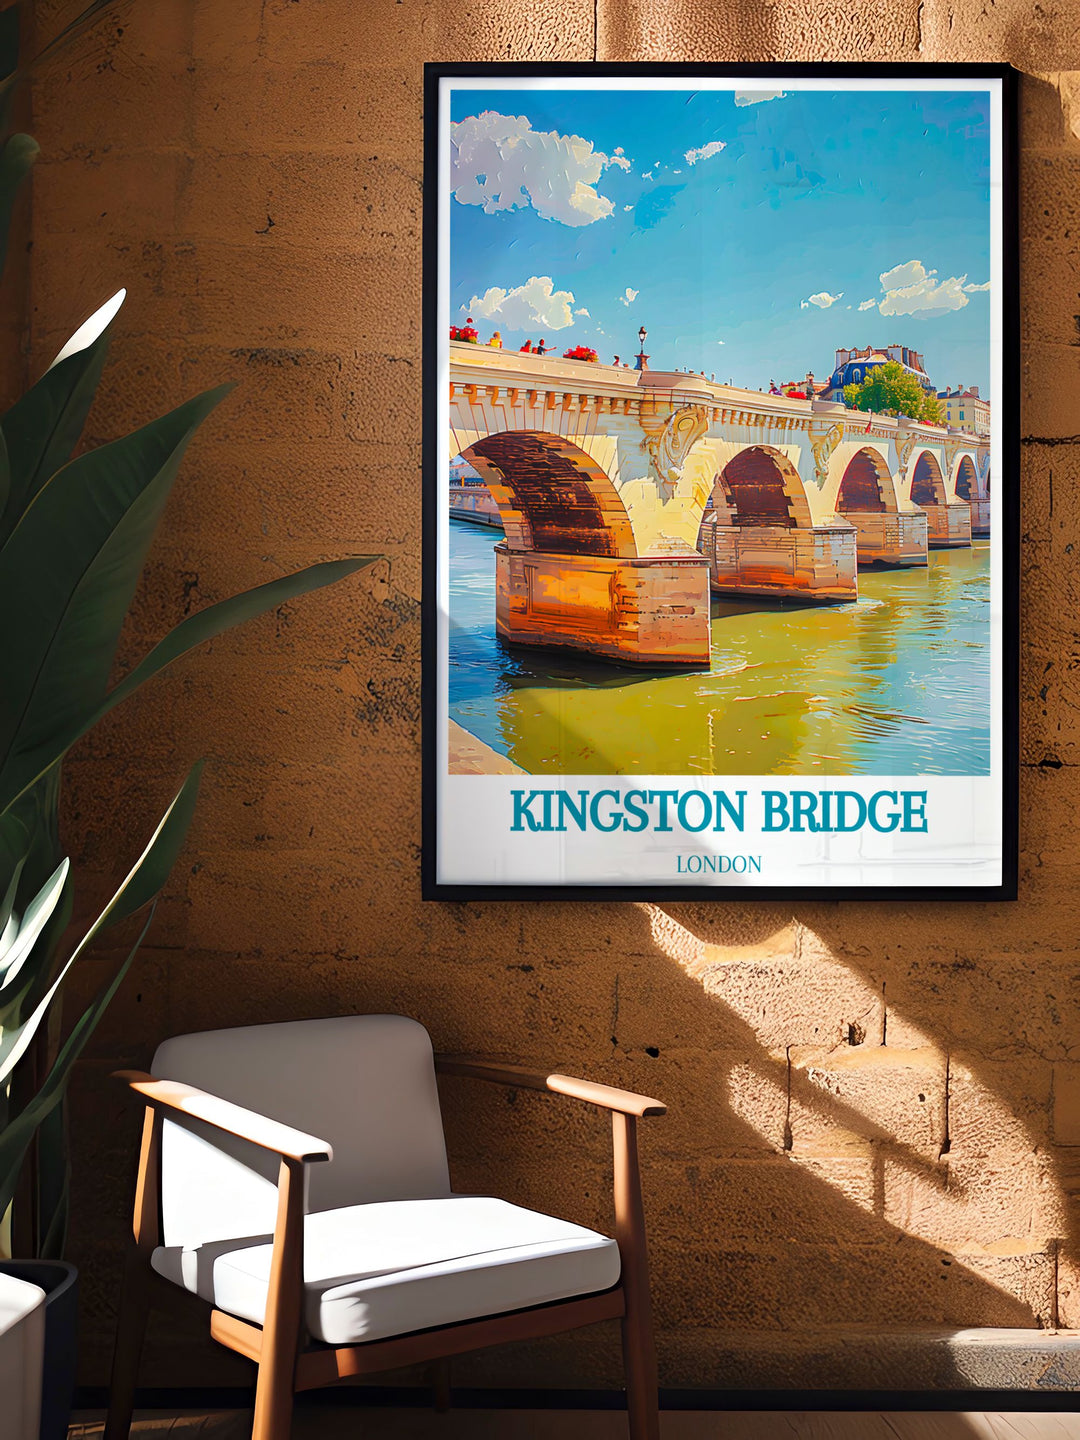 Showcasing the architectural beauty and historical significance of Kingston Bridge, this travel poster is ideal for adding a touch of Londons heritage to your decor.